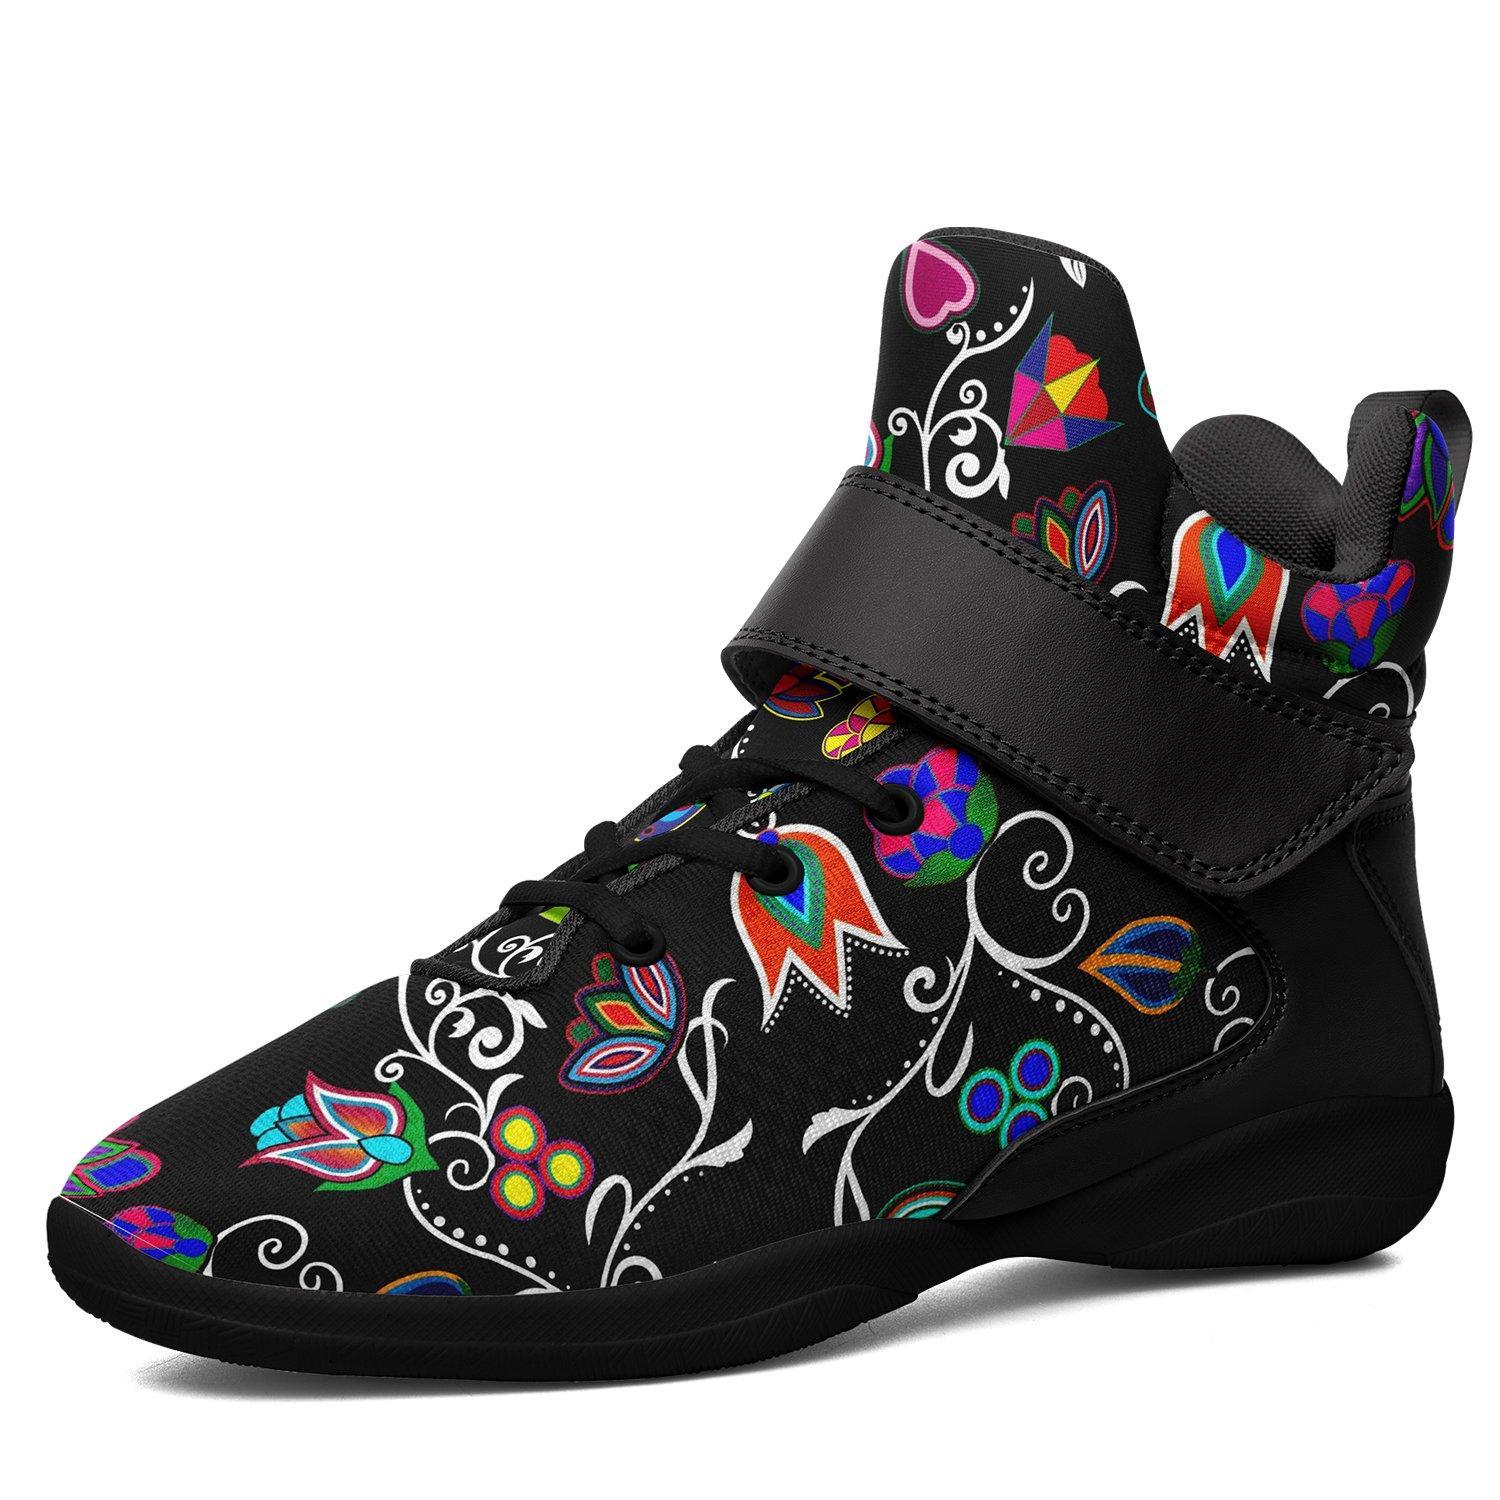 Indigenous Paisley Black Kid's Ipottaa Basketball / Sport High Top Shoes 49 Dzine US Child 12.5 / EUR 30 Black Sole with Black Strap 